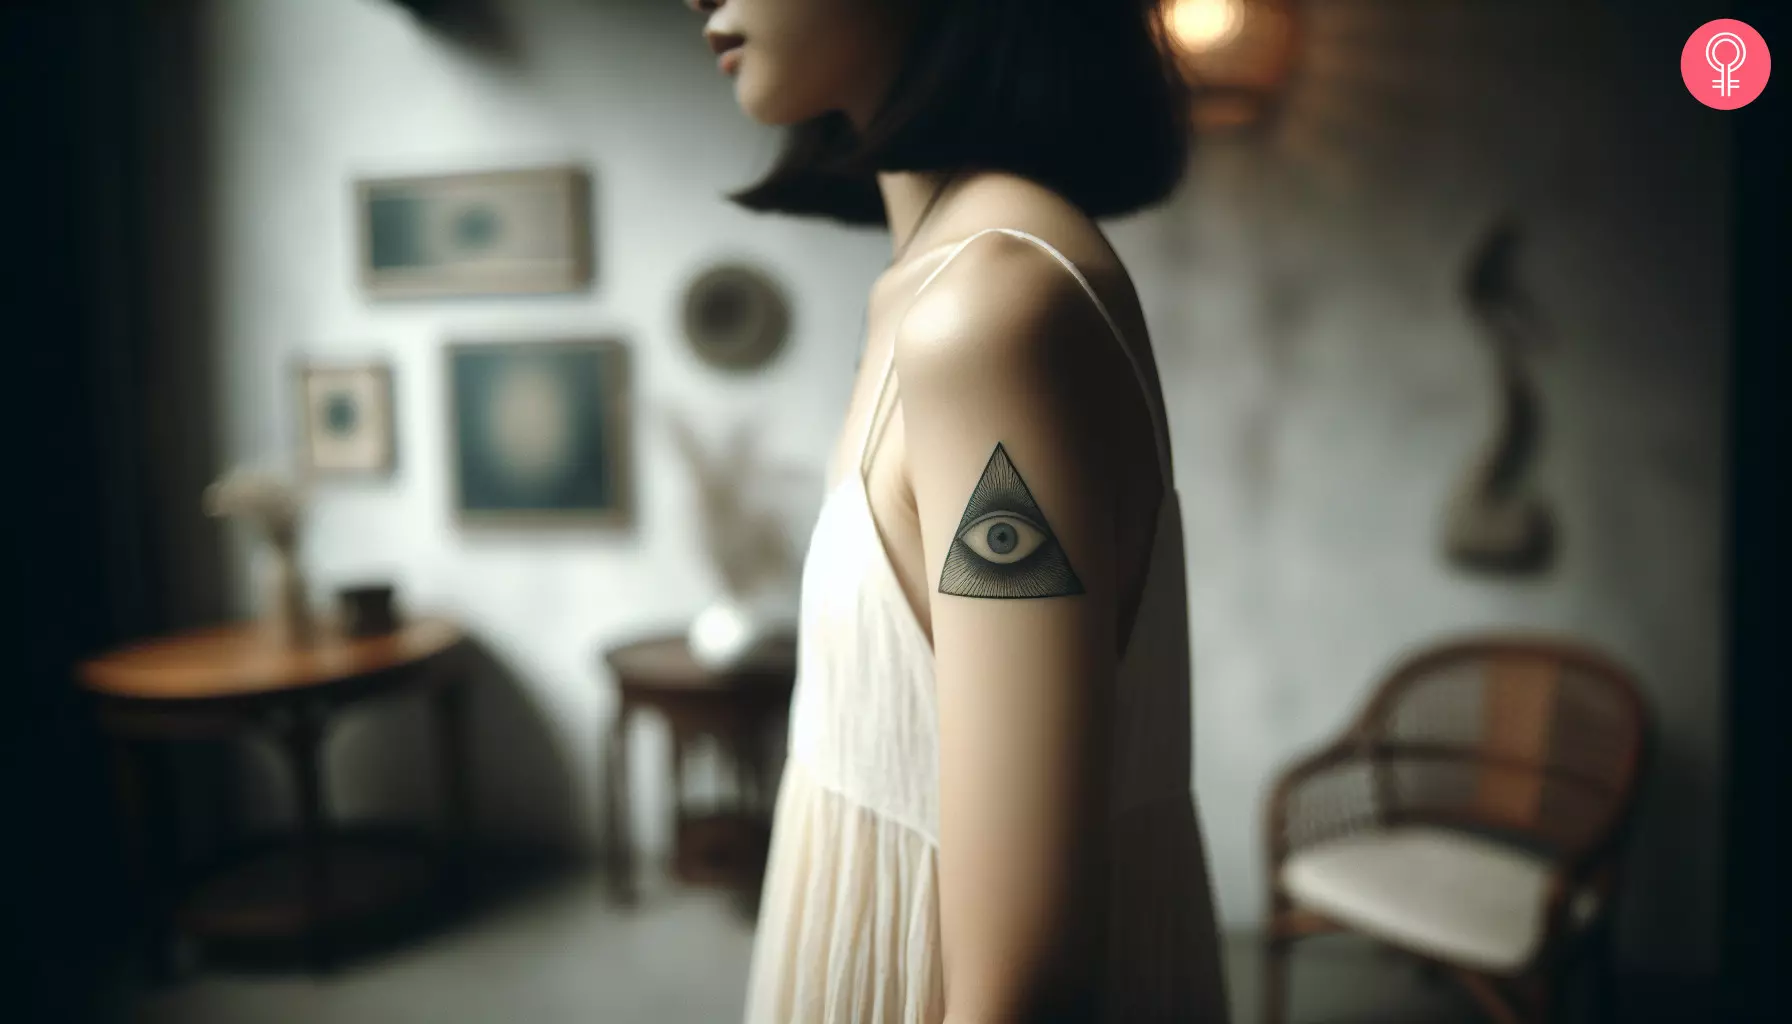 A woman with an evil eye triangle tattoo on her upper arm